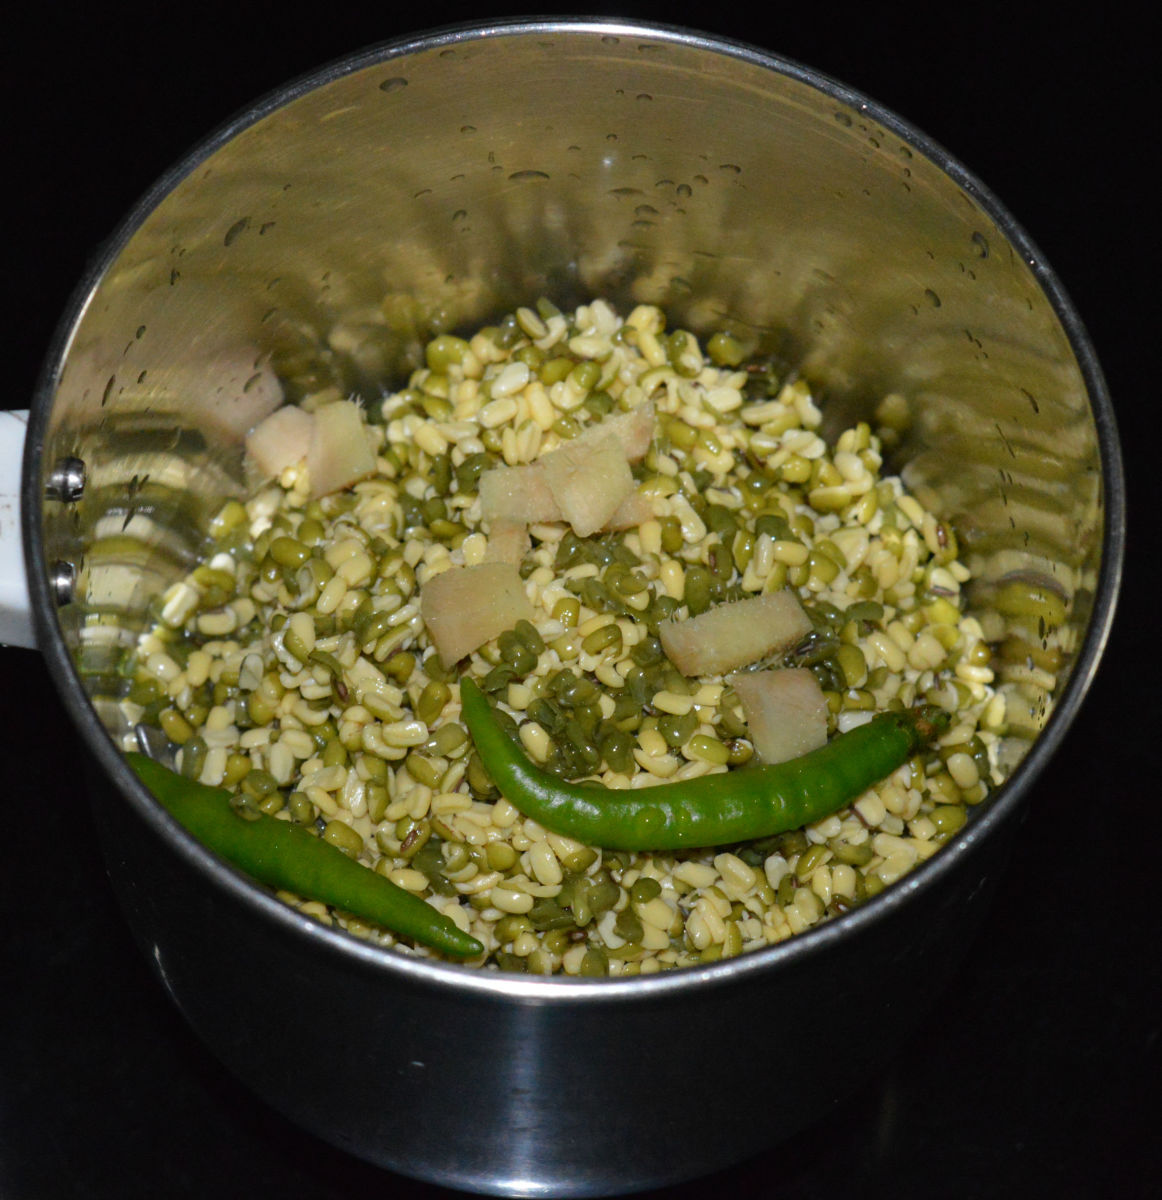 Step one: Grind soaked mung beans, chopped ginger, and green chilies in a mixer or blender to get a smooth, thick batter.